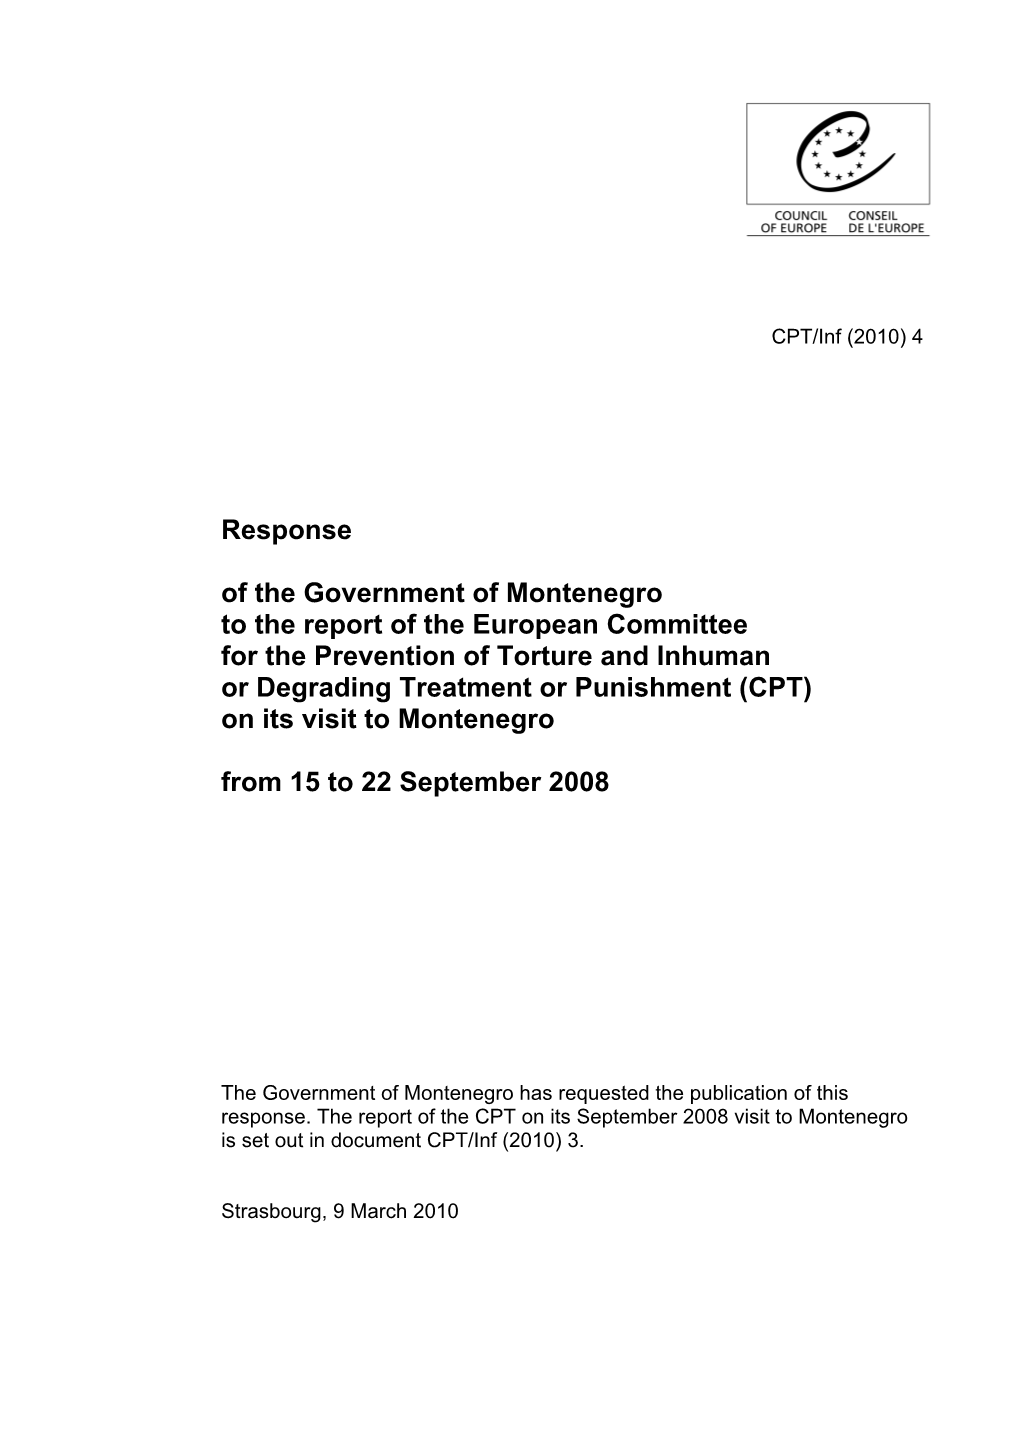 Response of the Government of Montenegro to the Report of The